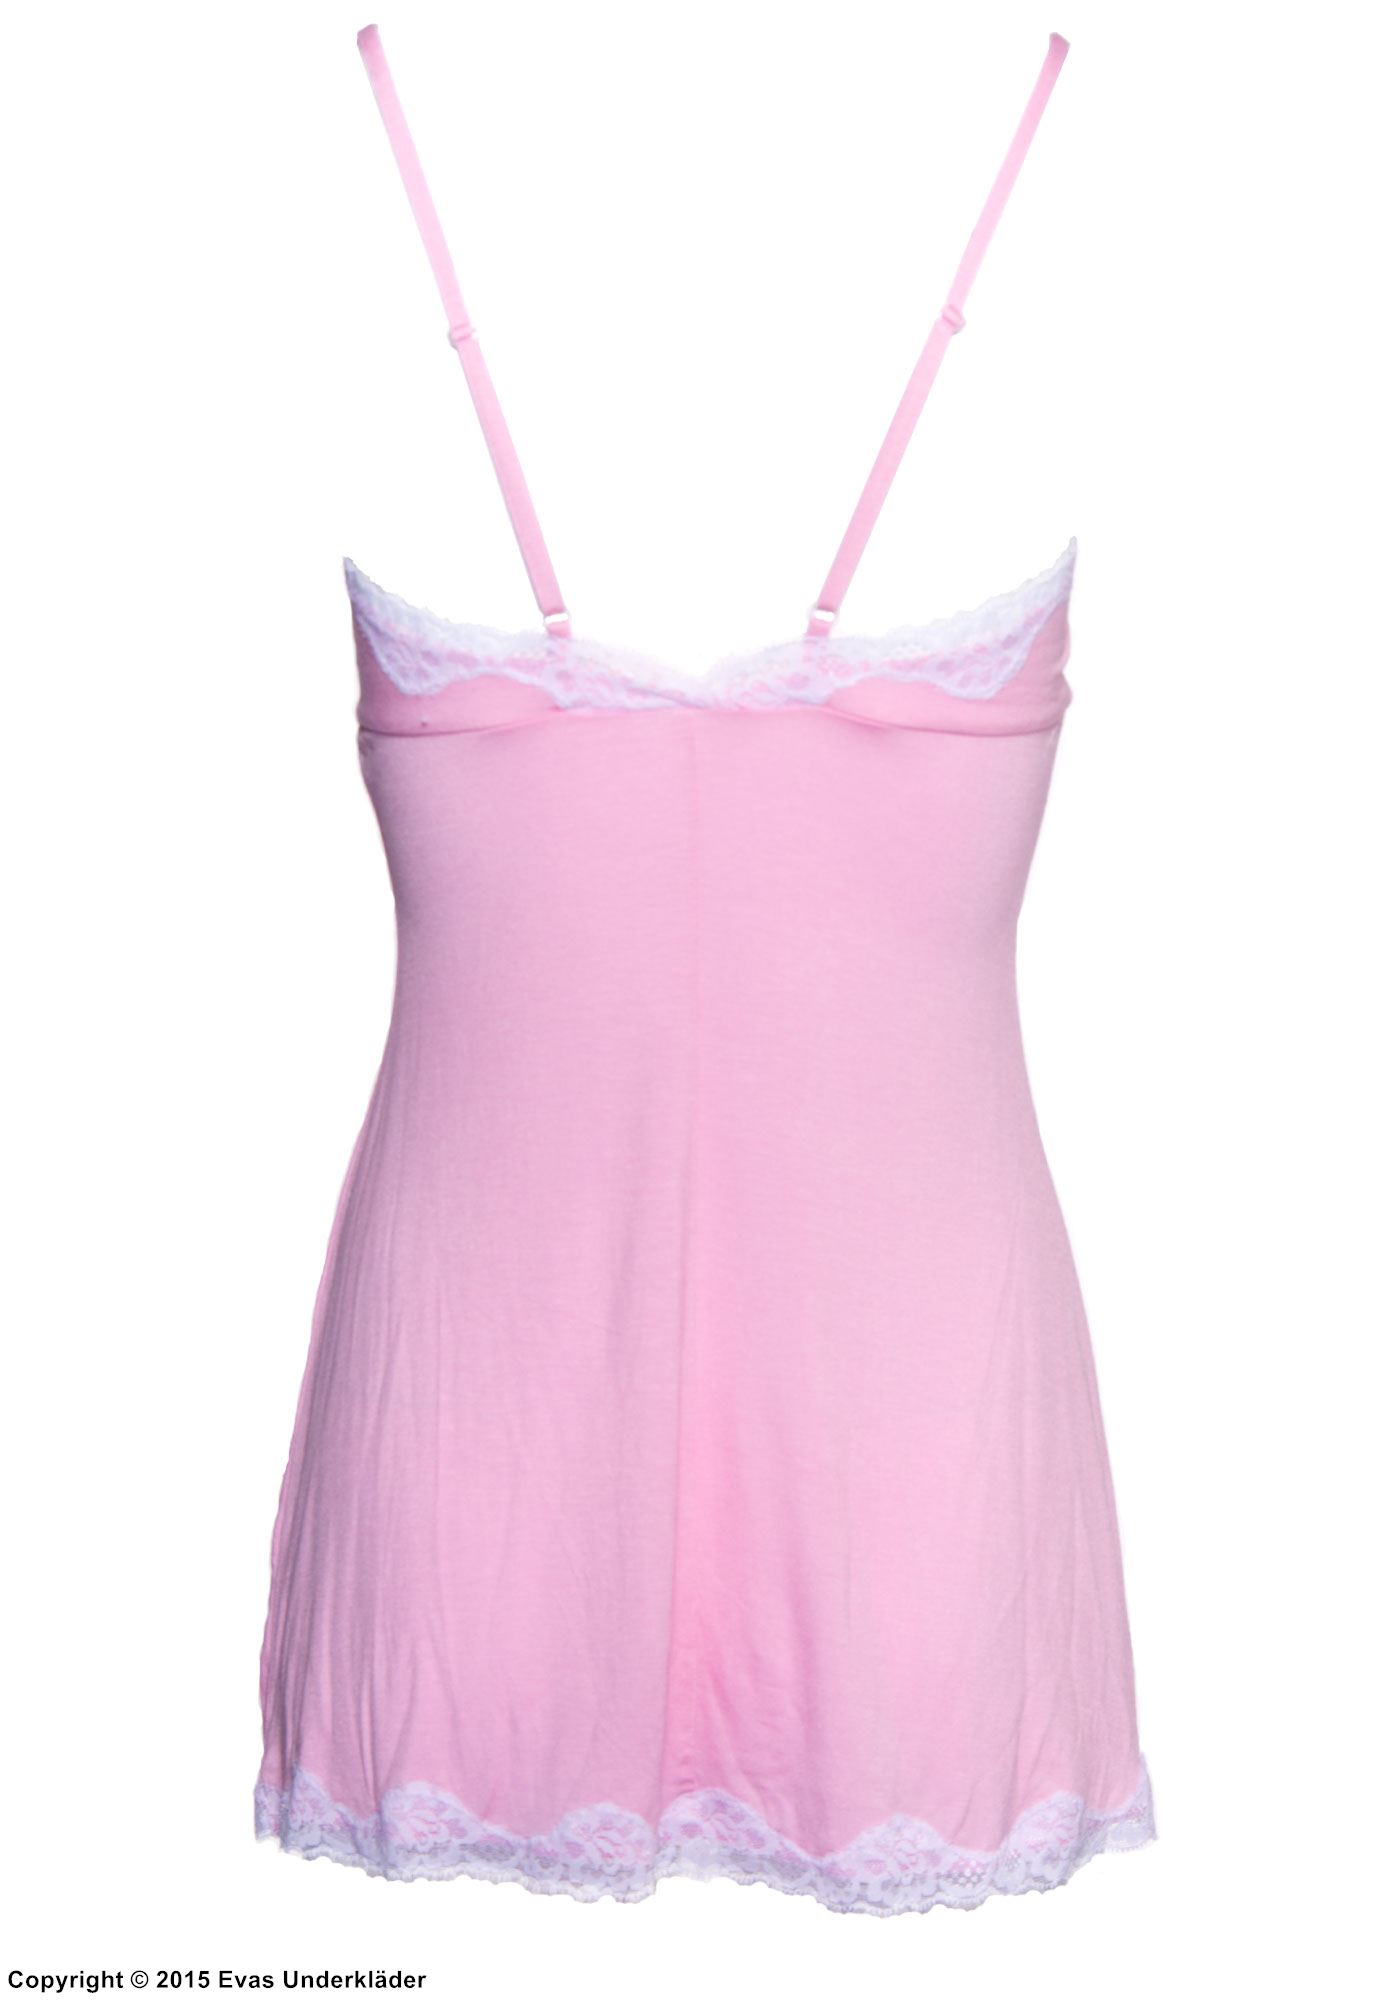 Cute chemise with lace borders